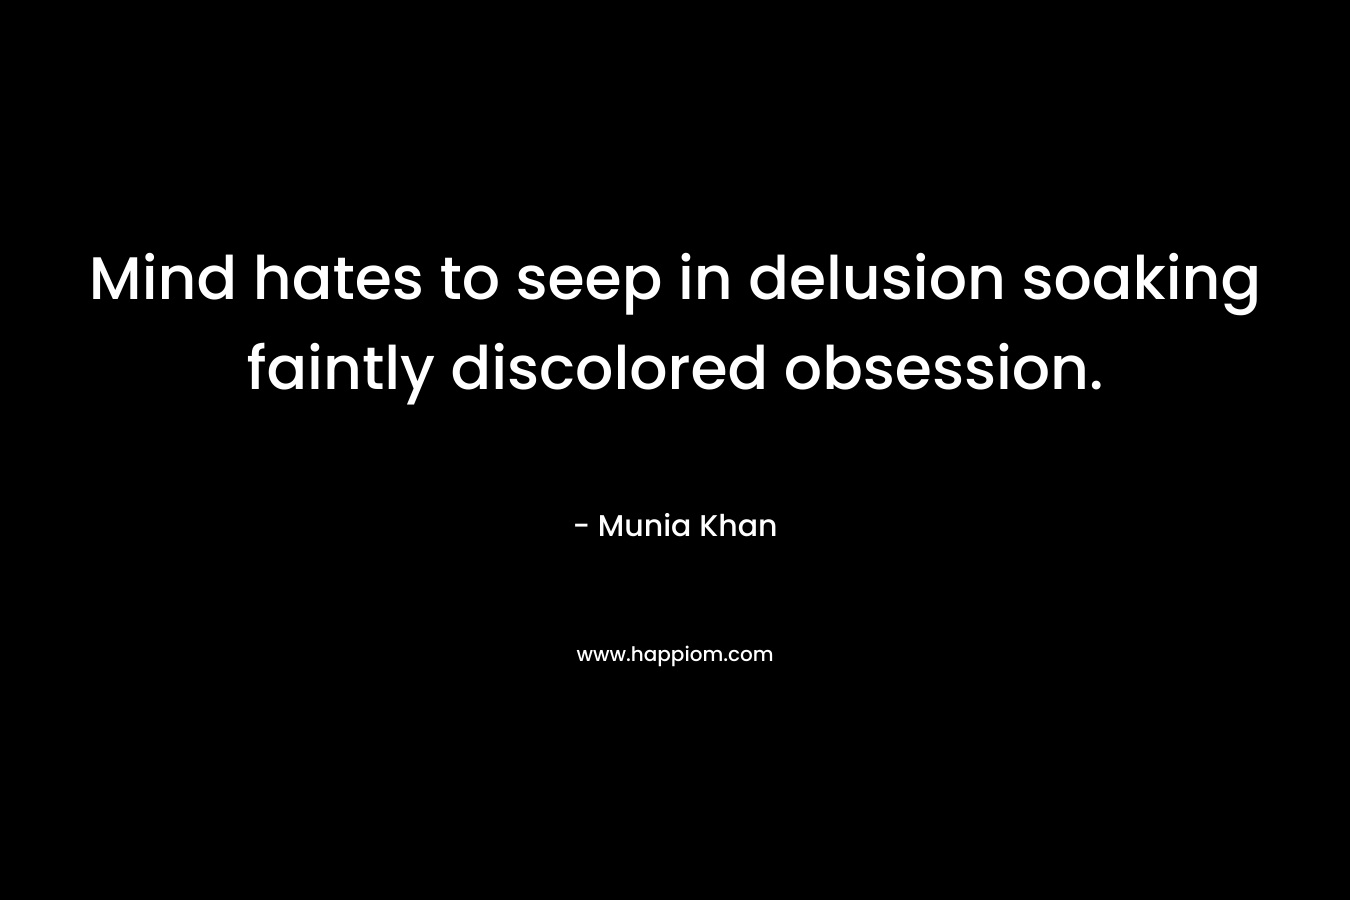 Mind hates to seep in delusion soaking faintly discolored obsession.